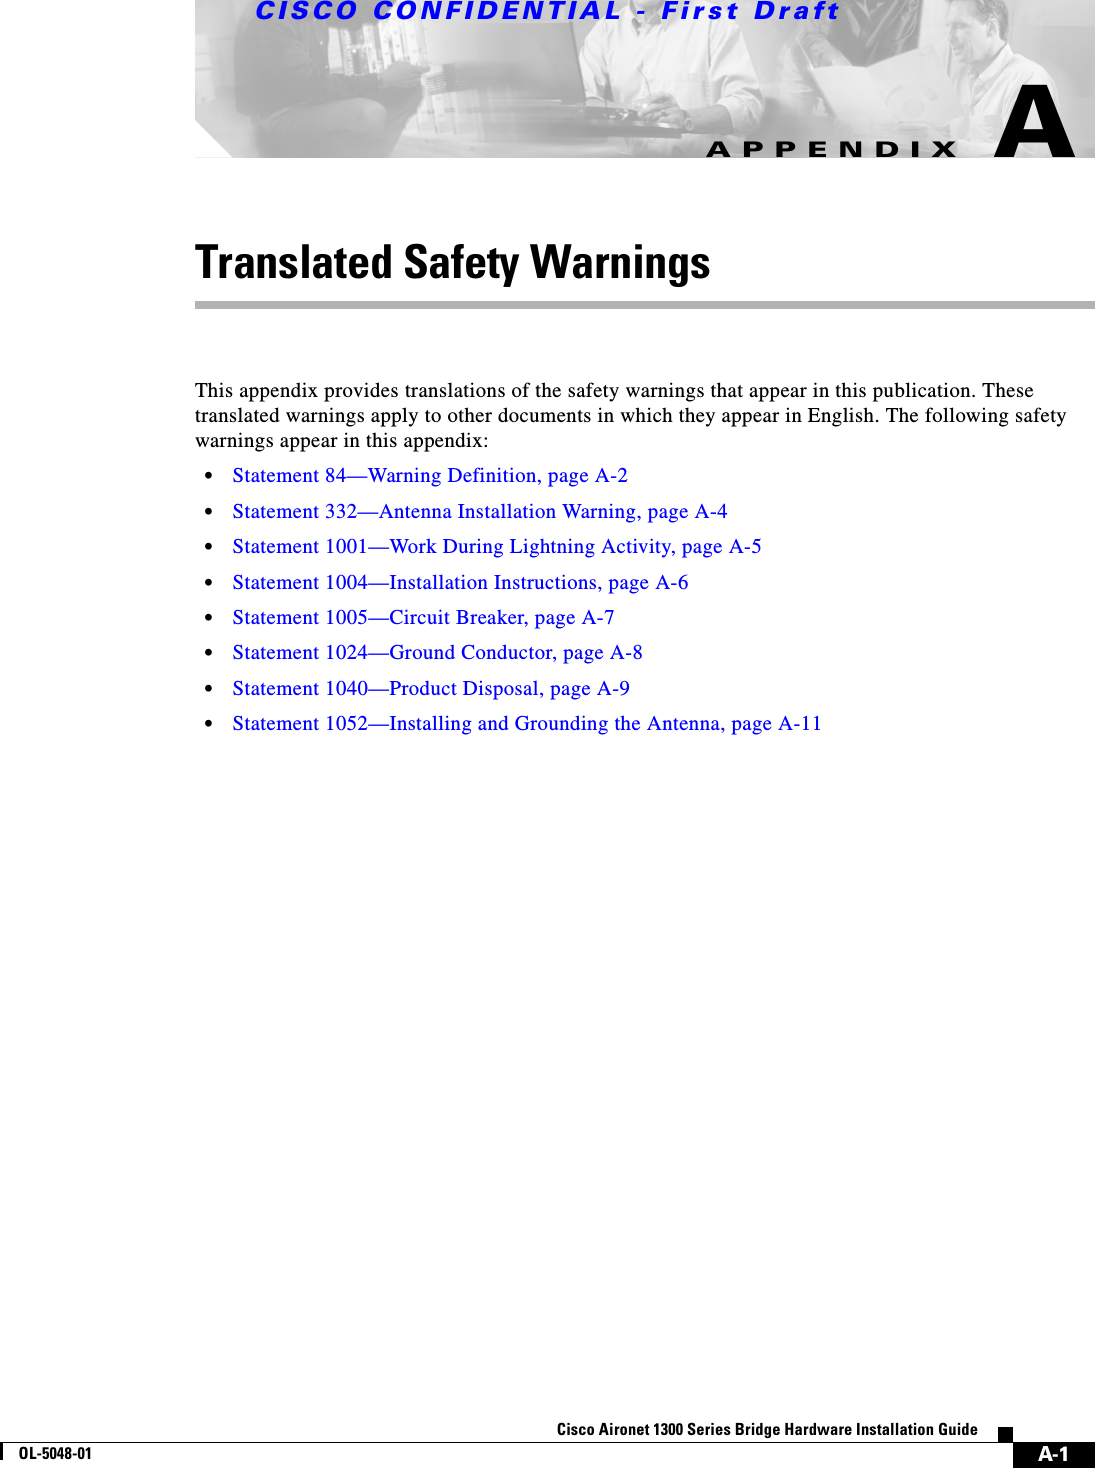 CISCO CONFIDENTIAL - First DraftA-1Cisco Aironet 1300 Series Bridge Hardware Installation GuideOL-5048-01APPENDIXATranslated Safety WarningsThis appendix provides translations of the safety warnings that appear in this publication. These translated warnings apply to other documents in which they appear in English. The following safety warnings appear in this appendix:•Statement 84—Warning Definition, page A-2•Statement 332—Antenna Installation Warning, page A-4•Statement 1001—Work During Lightning Activity, page A-5•Statement 1004—Installation Instructions, page A-6•Statement 1005—Circuit Breaker, page A-7•Statement 1024—Ground Conductor, page A-8•Statement 1040—Product Disposal, page A-9•Statement 1052—Installing and Grounding the Antenna, page A-11